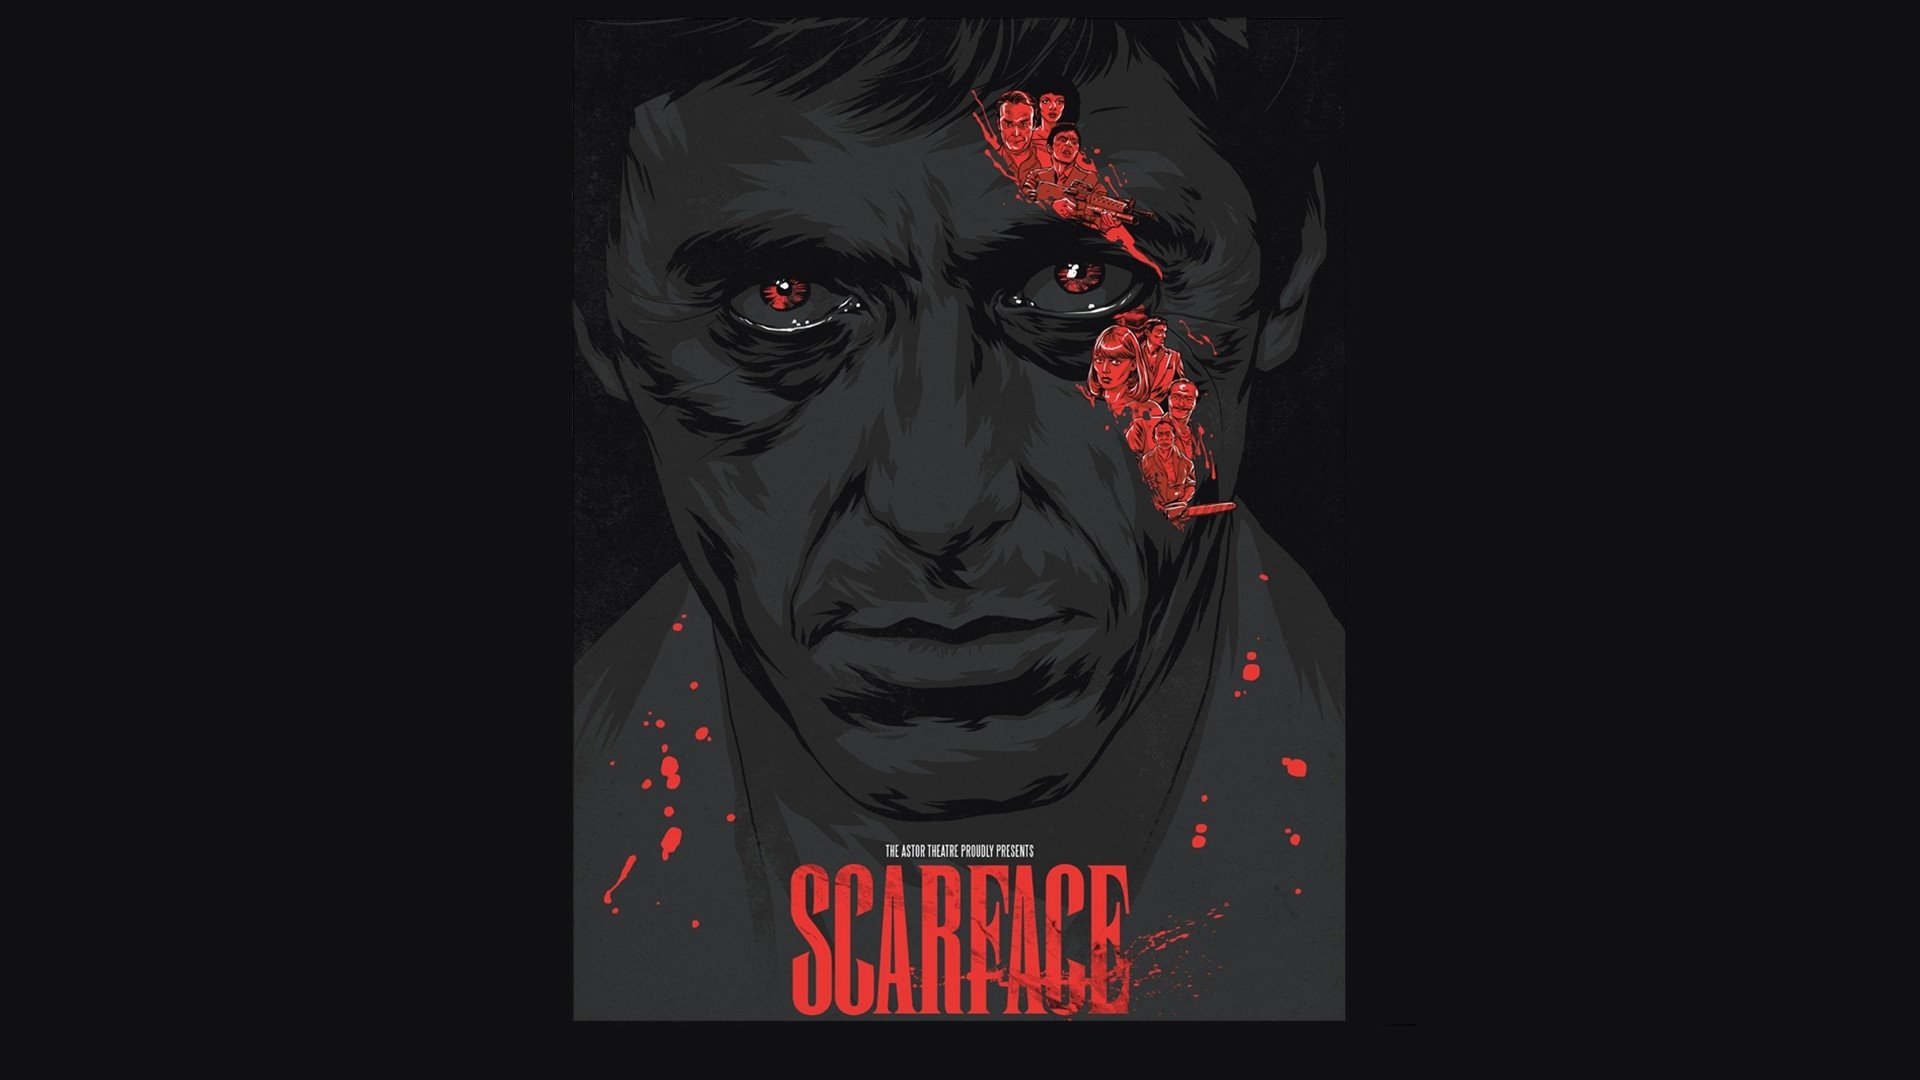 Scarface Wallpapers